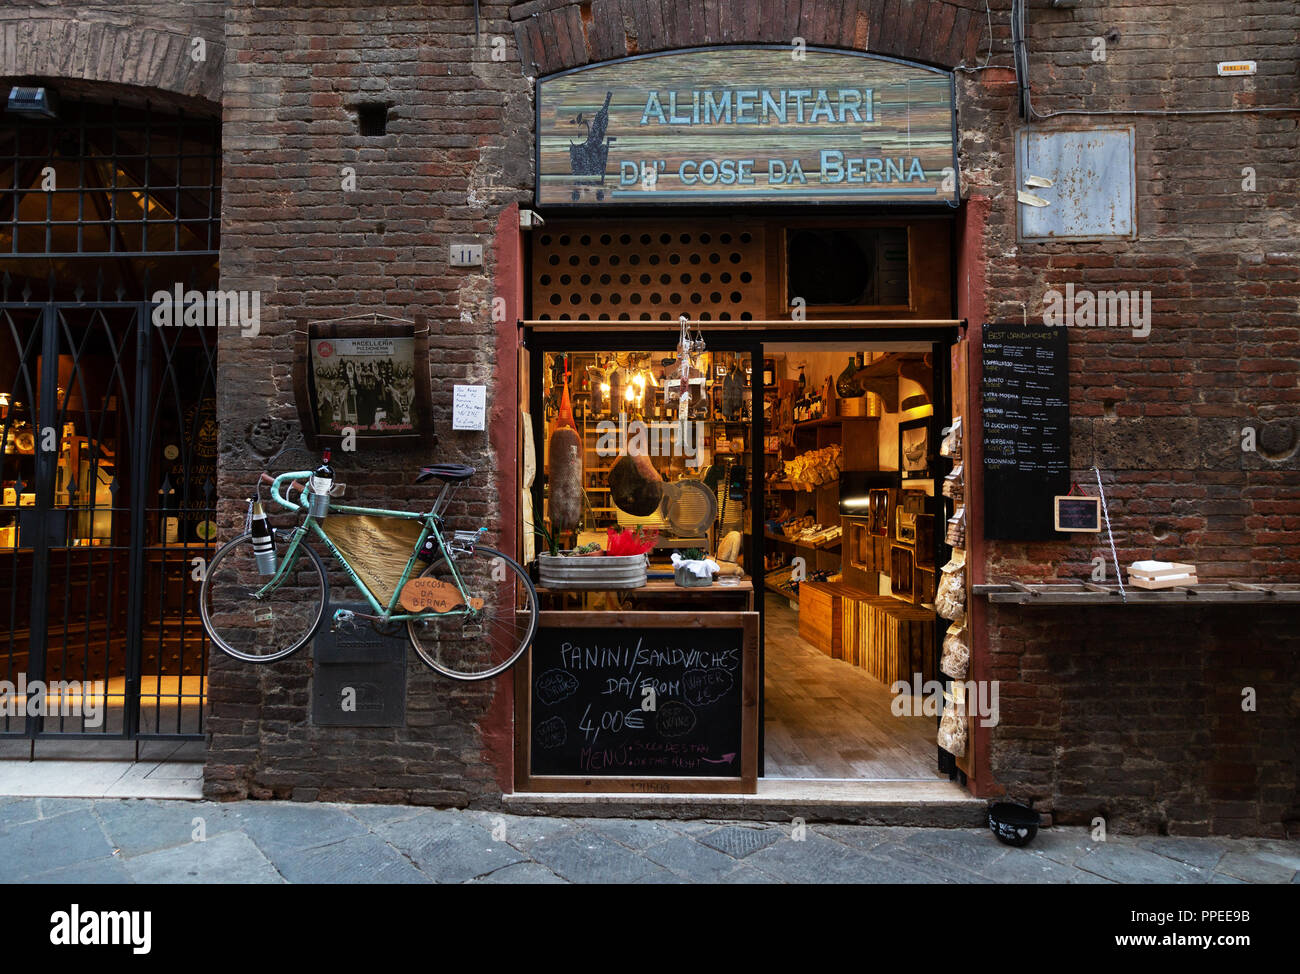 Exterior of An Alimentari, or food shop, Siena, Italy Europe Stock Photo